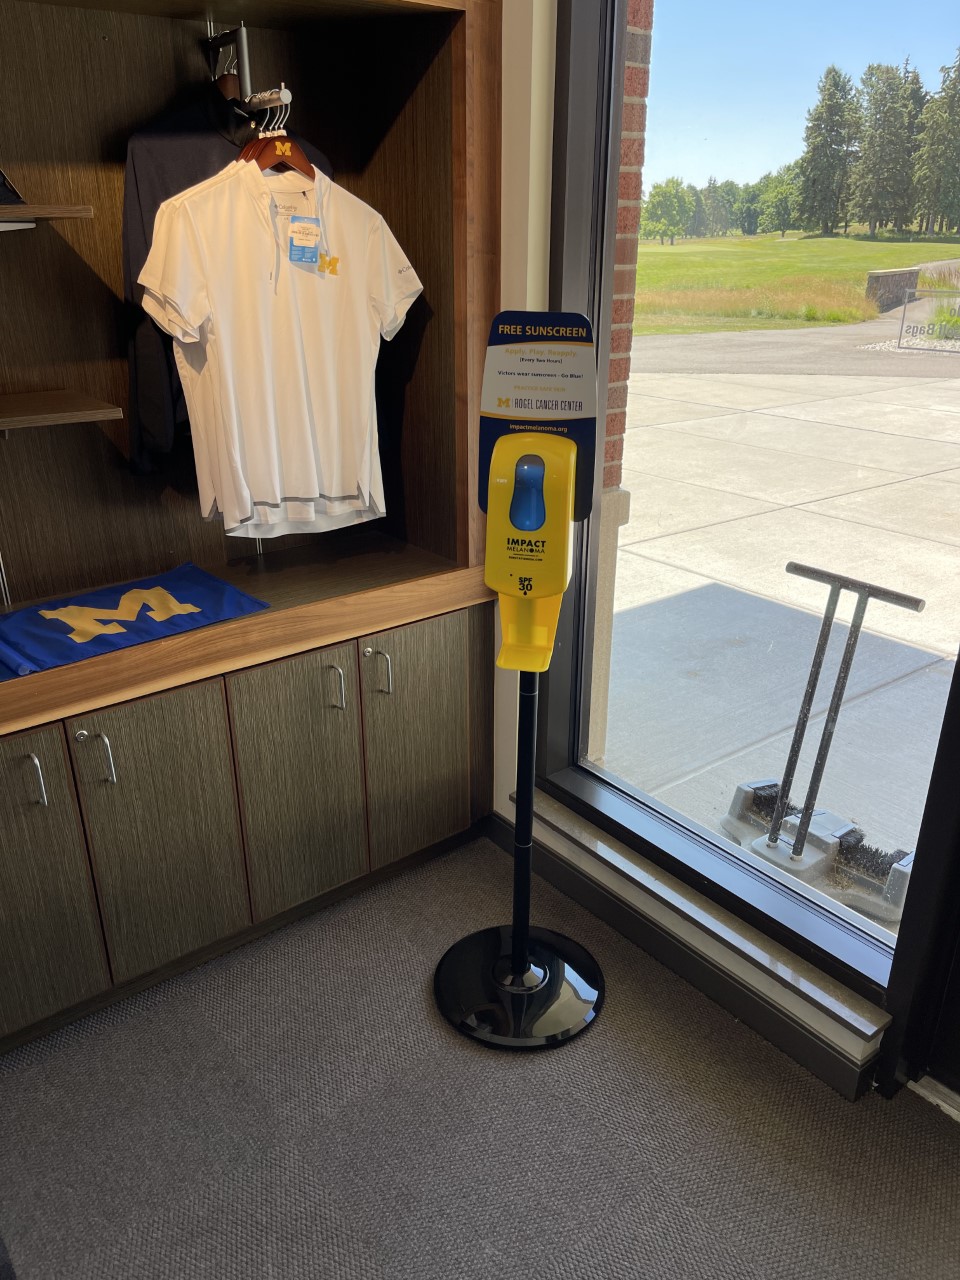 A sunscreen dispenseer located at U-M's golf course